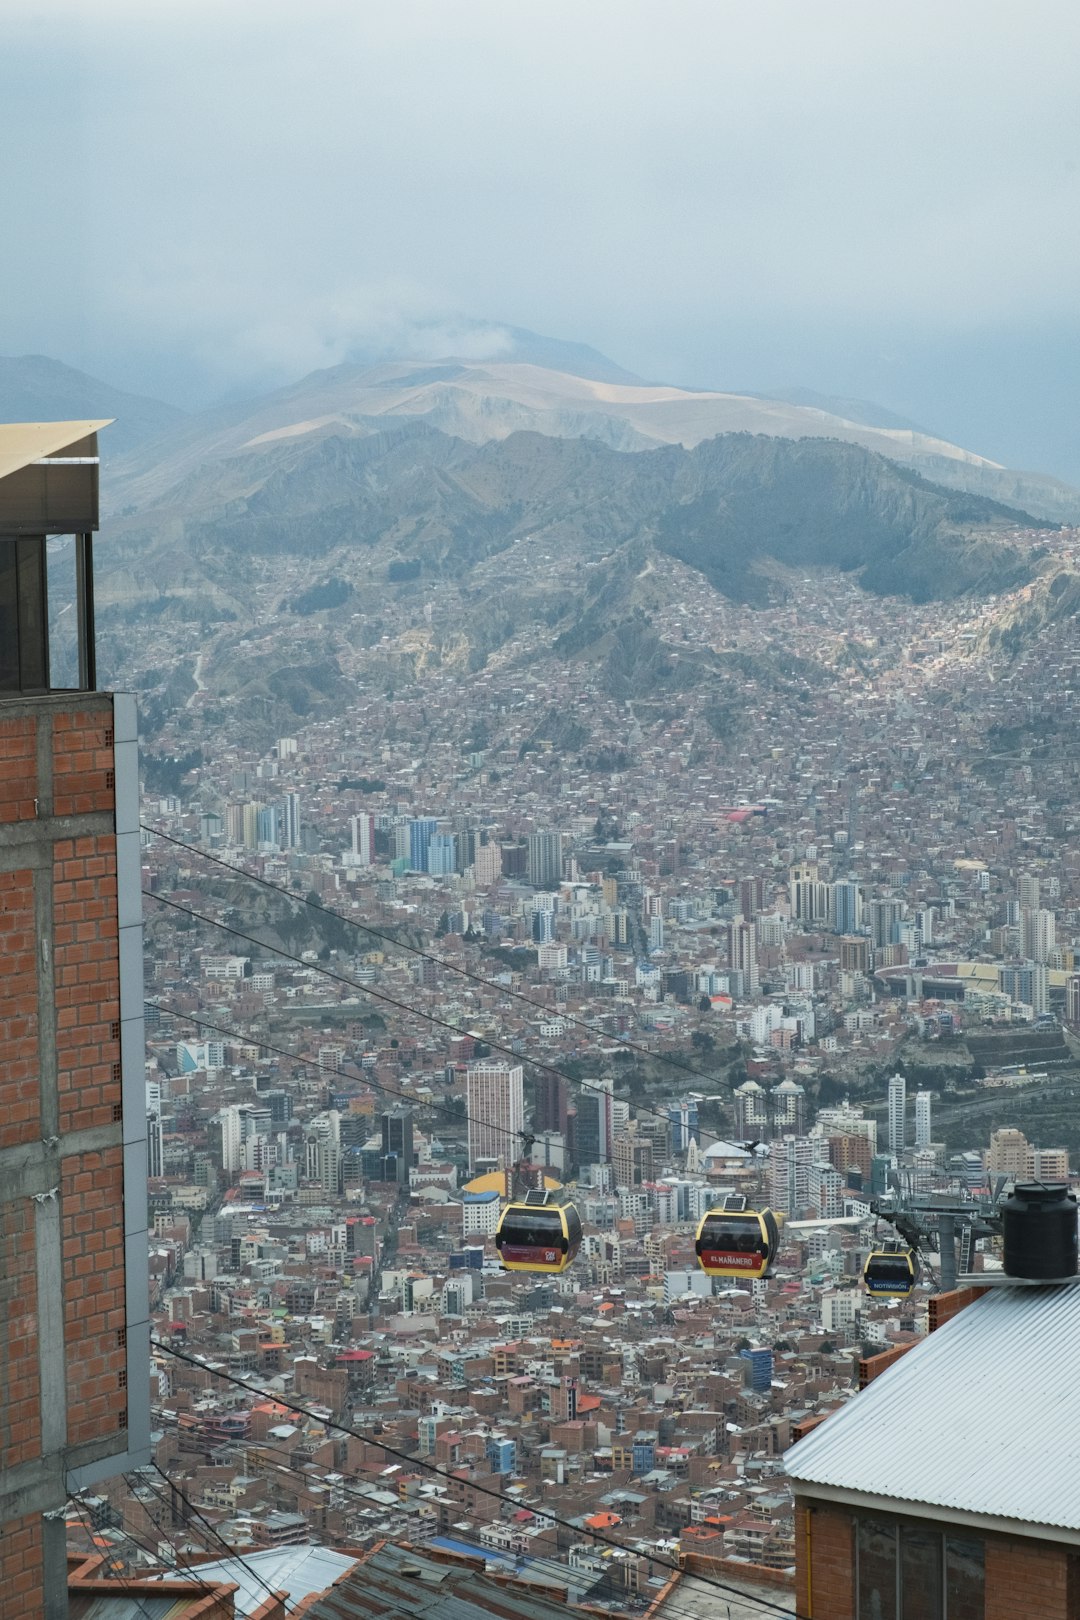 Travel Tips and Stories of La Paz in Bolivia